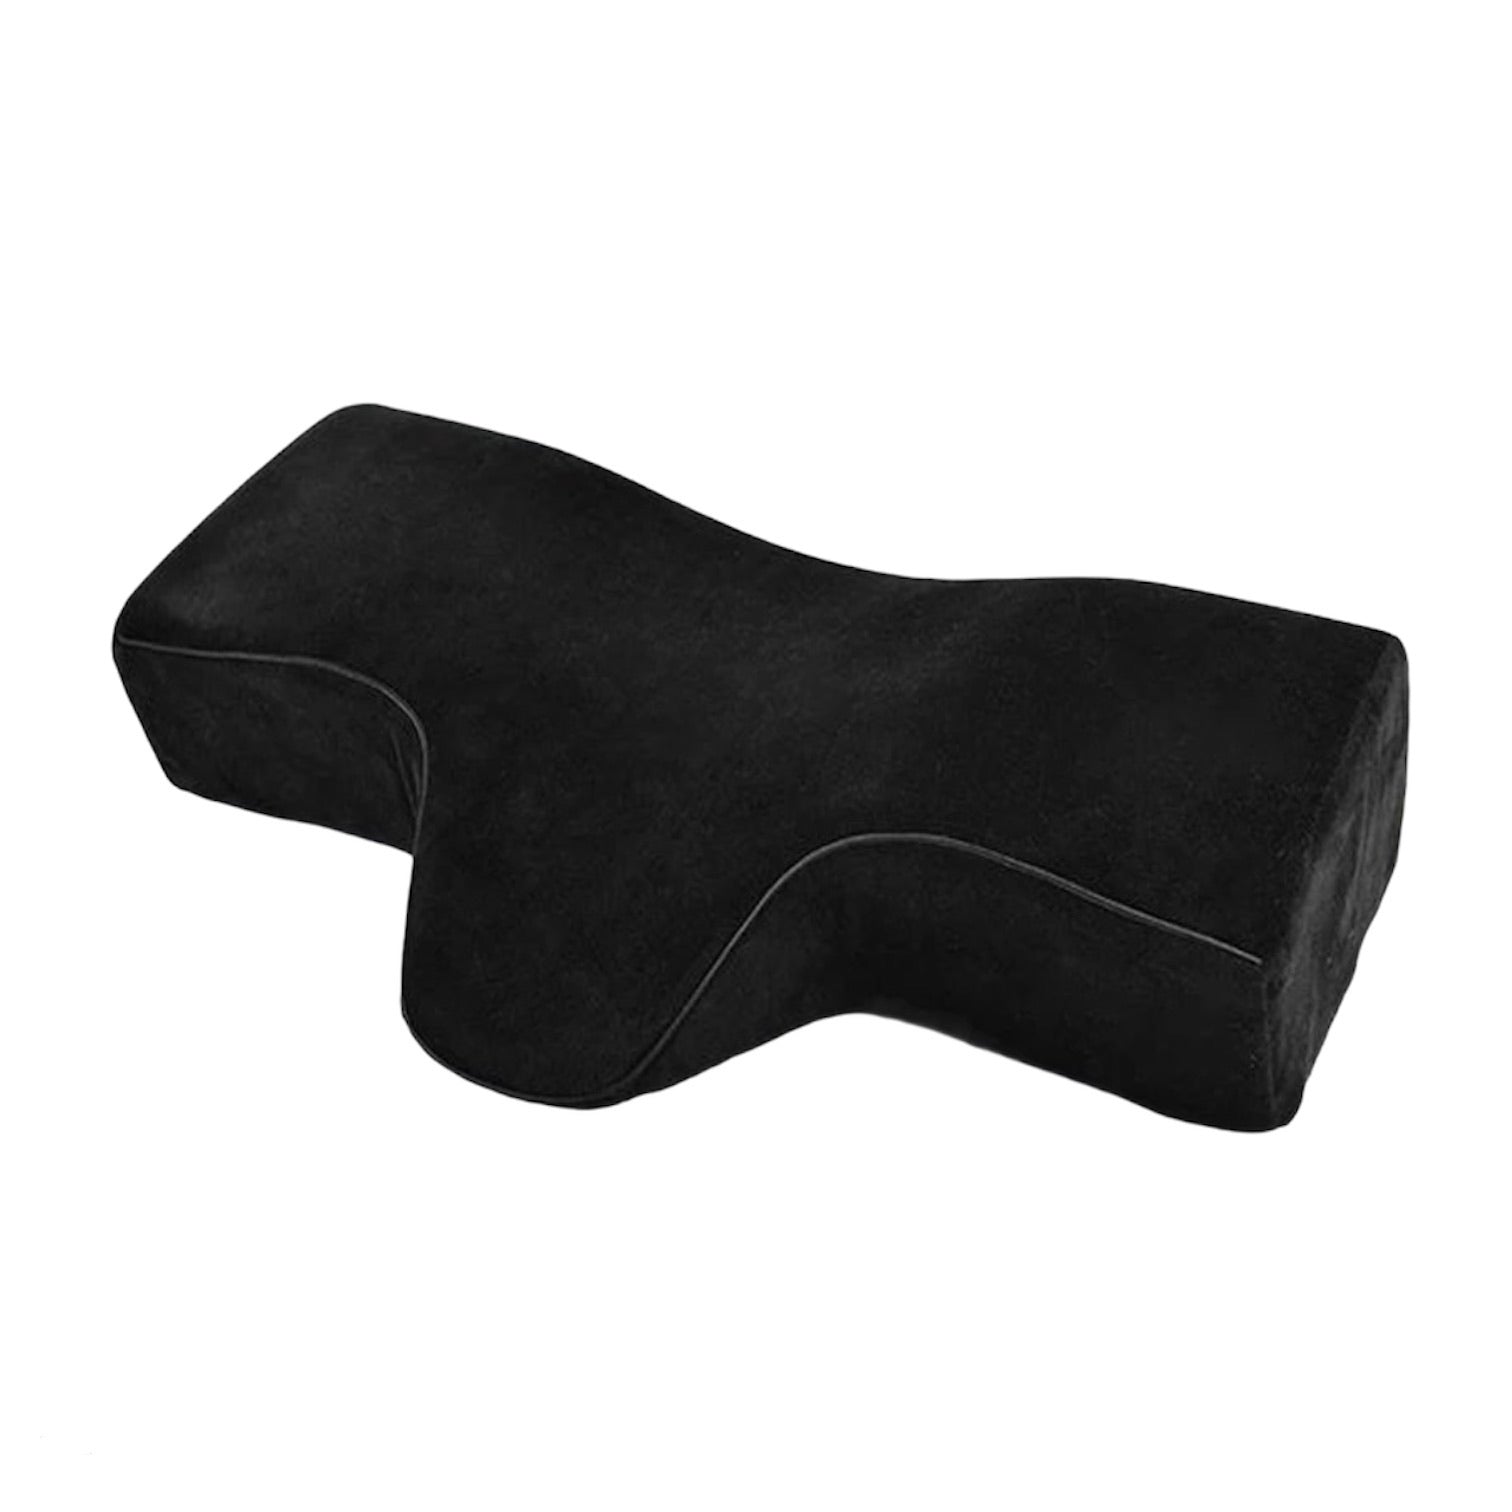 Vippe pude / Lash pillow X Large size